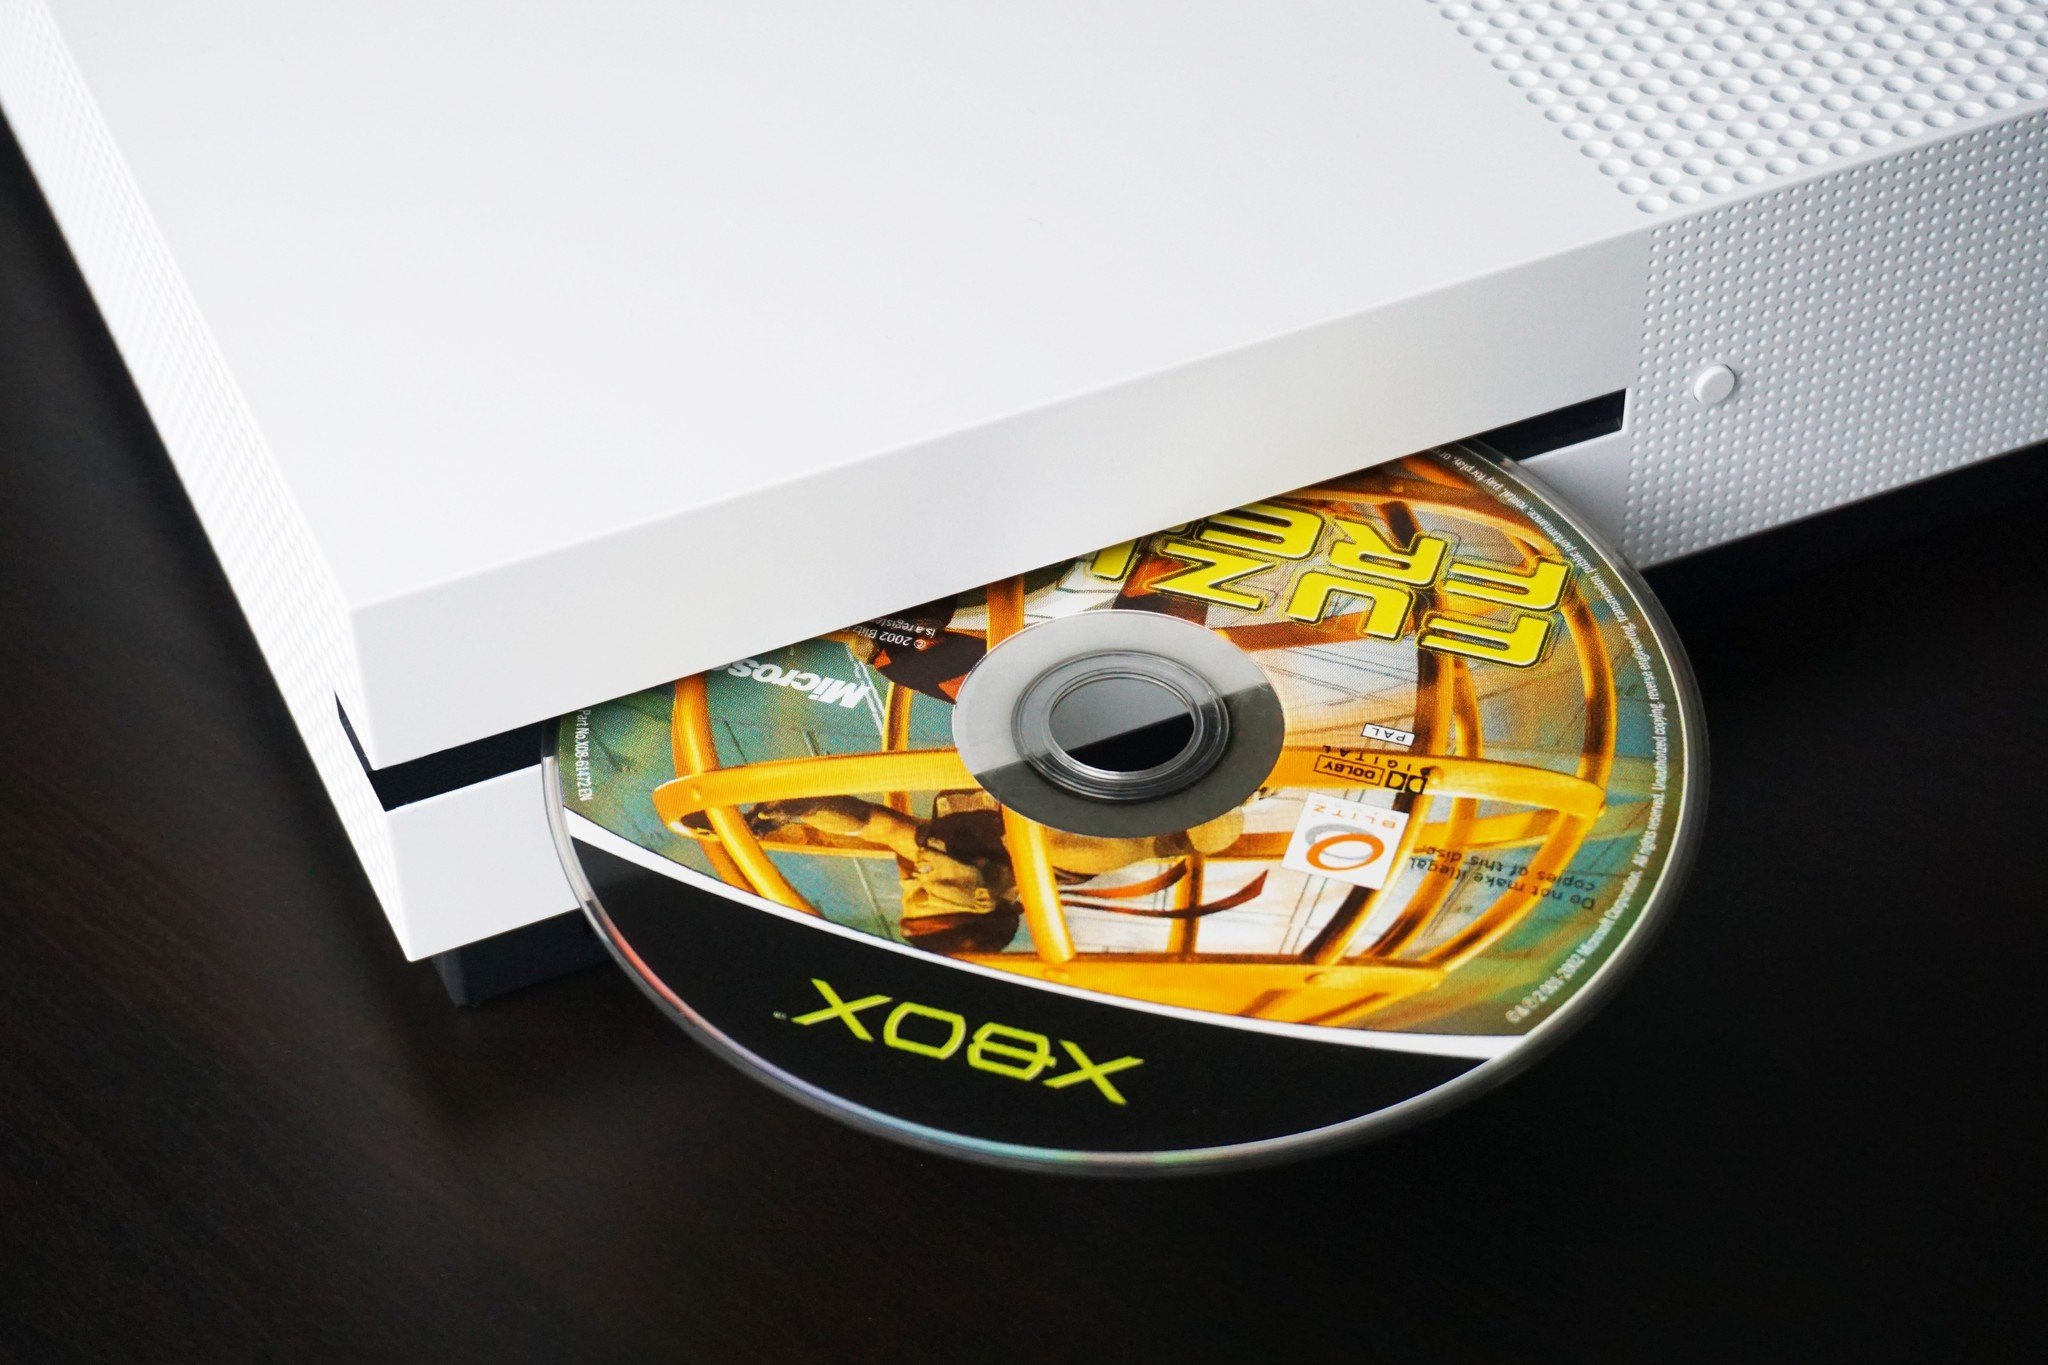 Microsoft open to your suggestions for more Xbox back-compat games